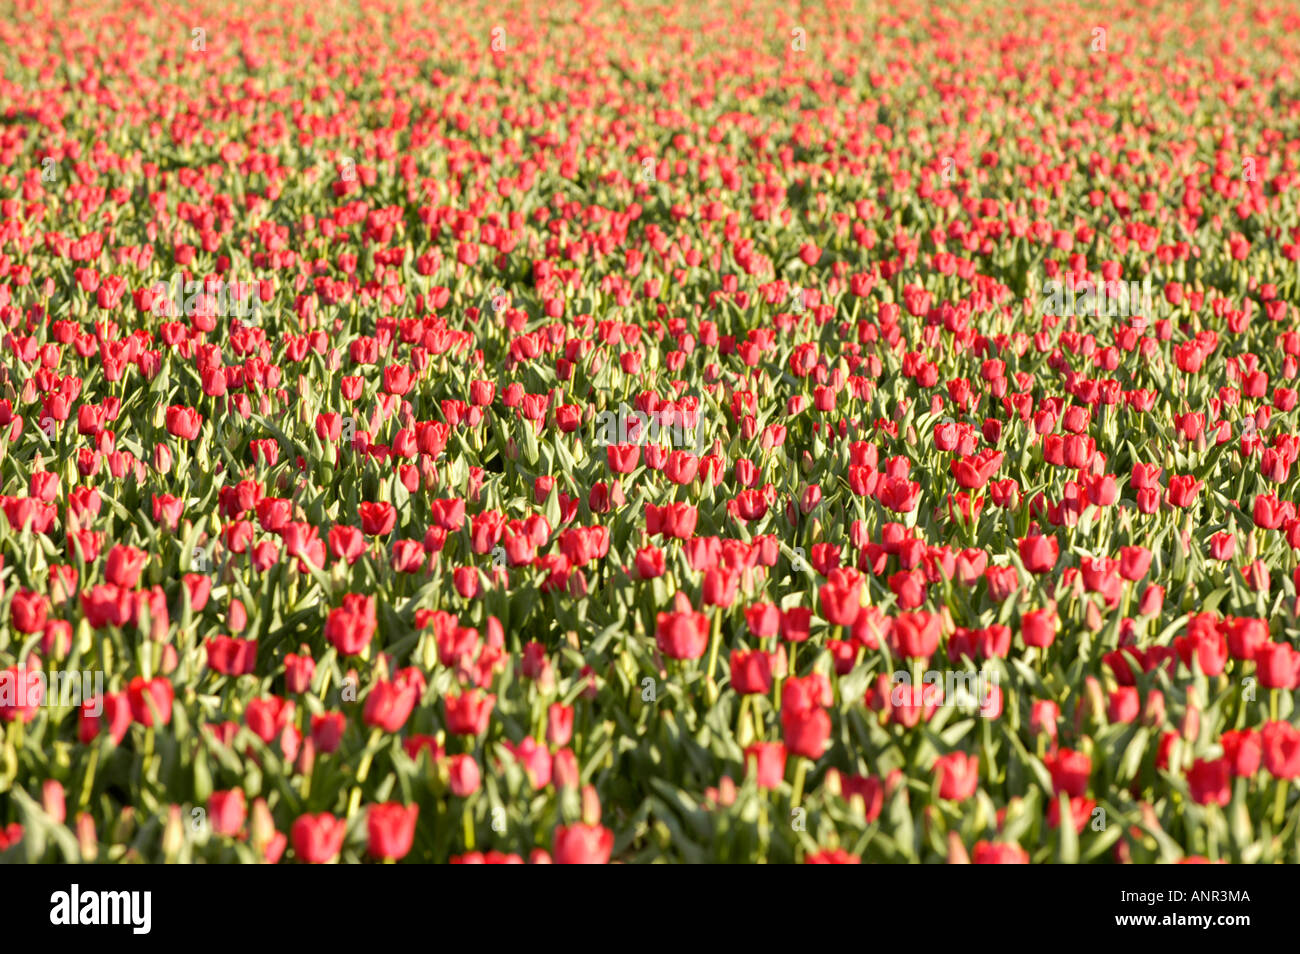 Washington Skagit Valley Field of red tulips in bloom during the Tulip Festival along the Chuckanut scenic highway Stock Photo